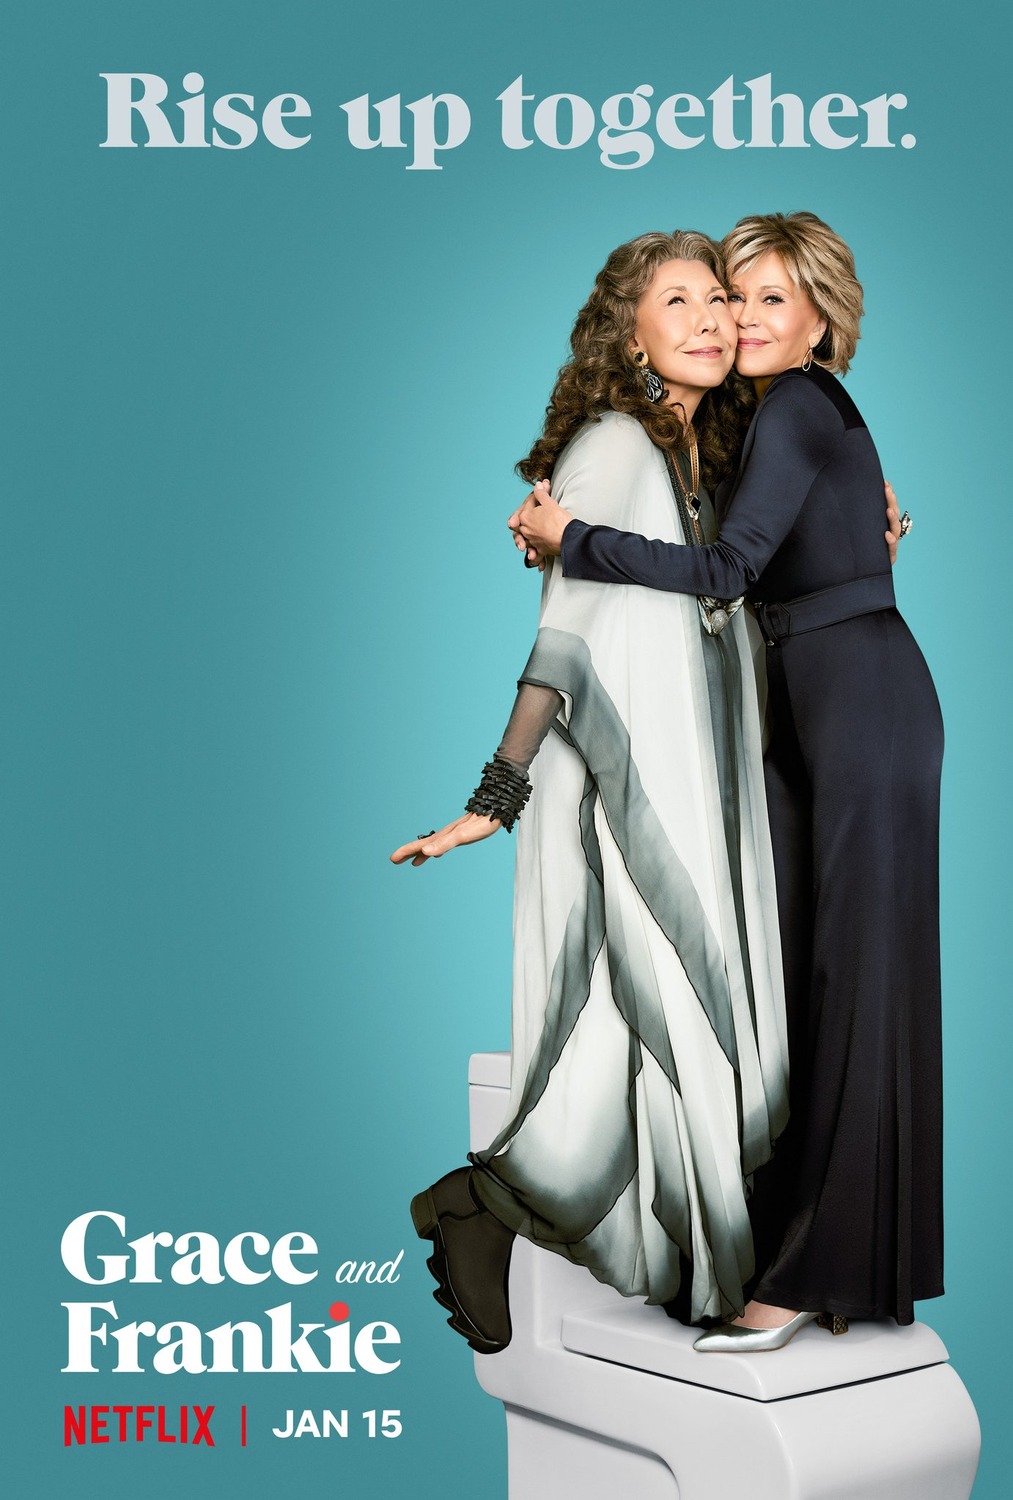 Grace and Frankie – Series Plot, Review, Details, Cast, Ratings, Trailer